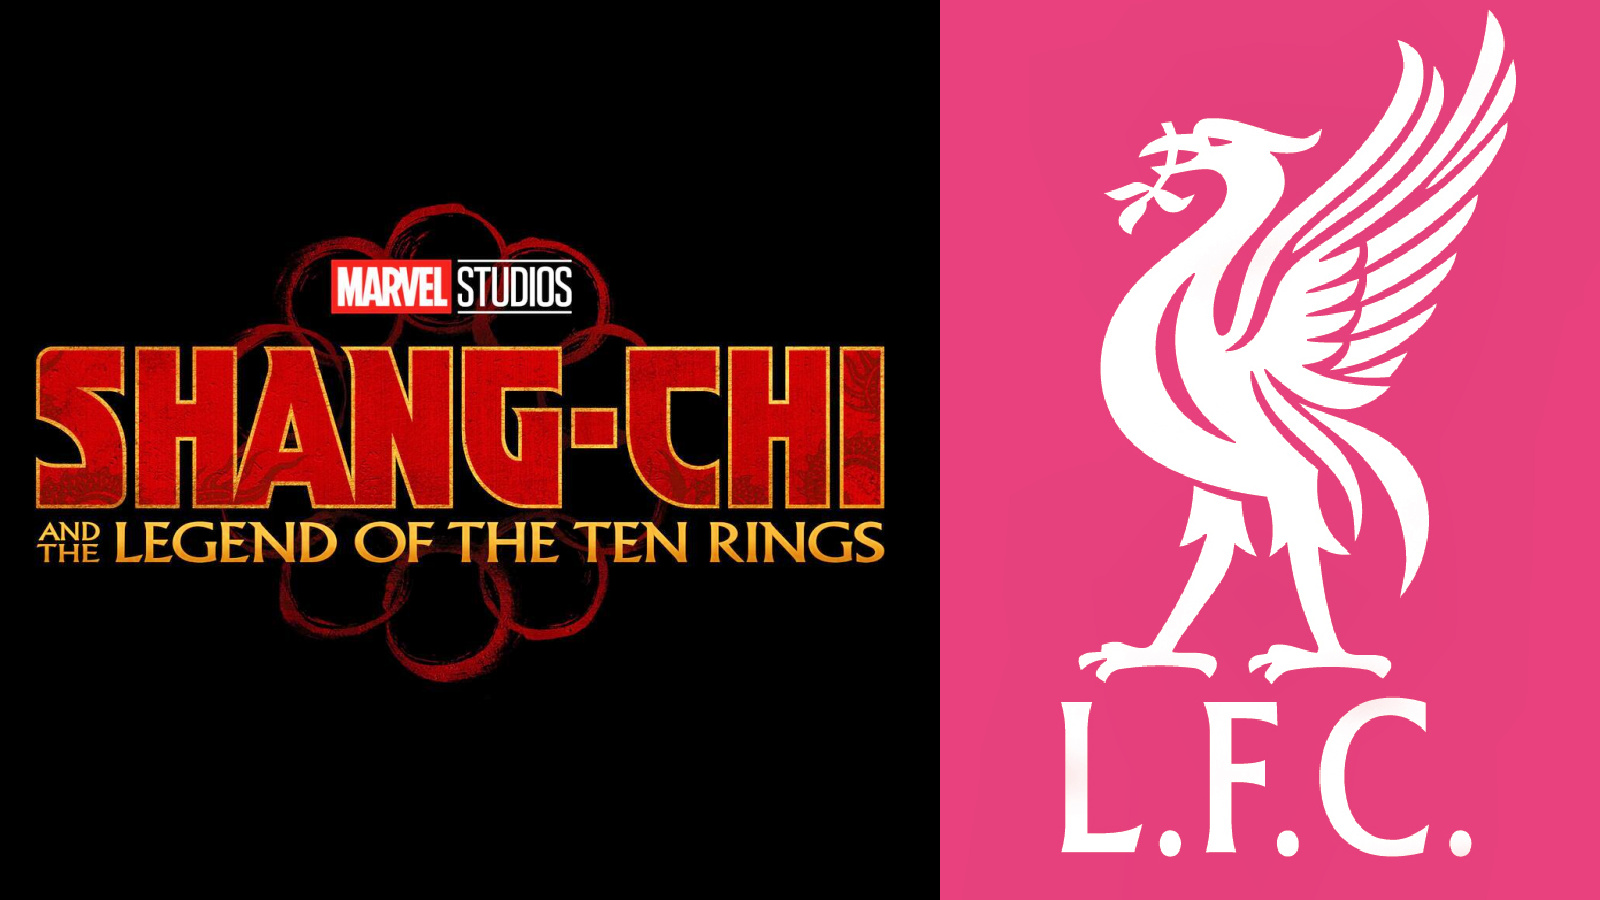 The Liverpool references you may have missed in the new Marvel movie Shang-Chi and the Legend of the Ten Rings